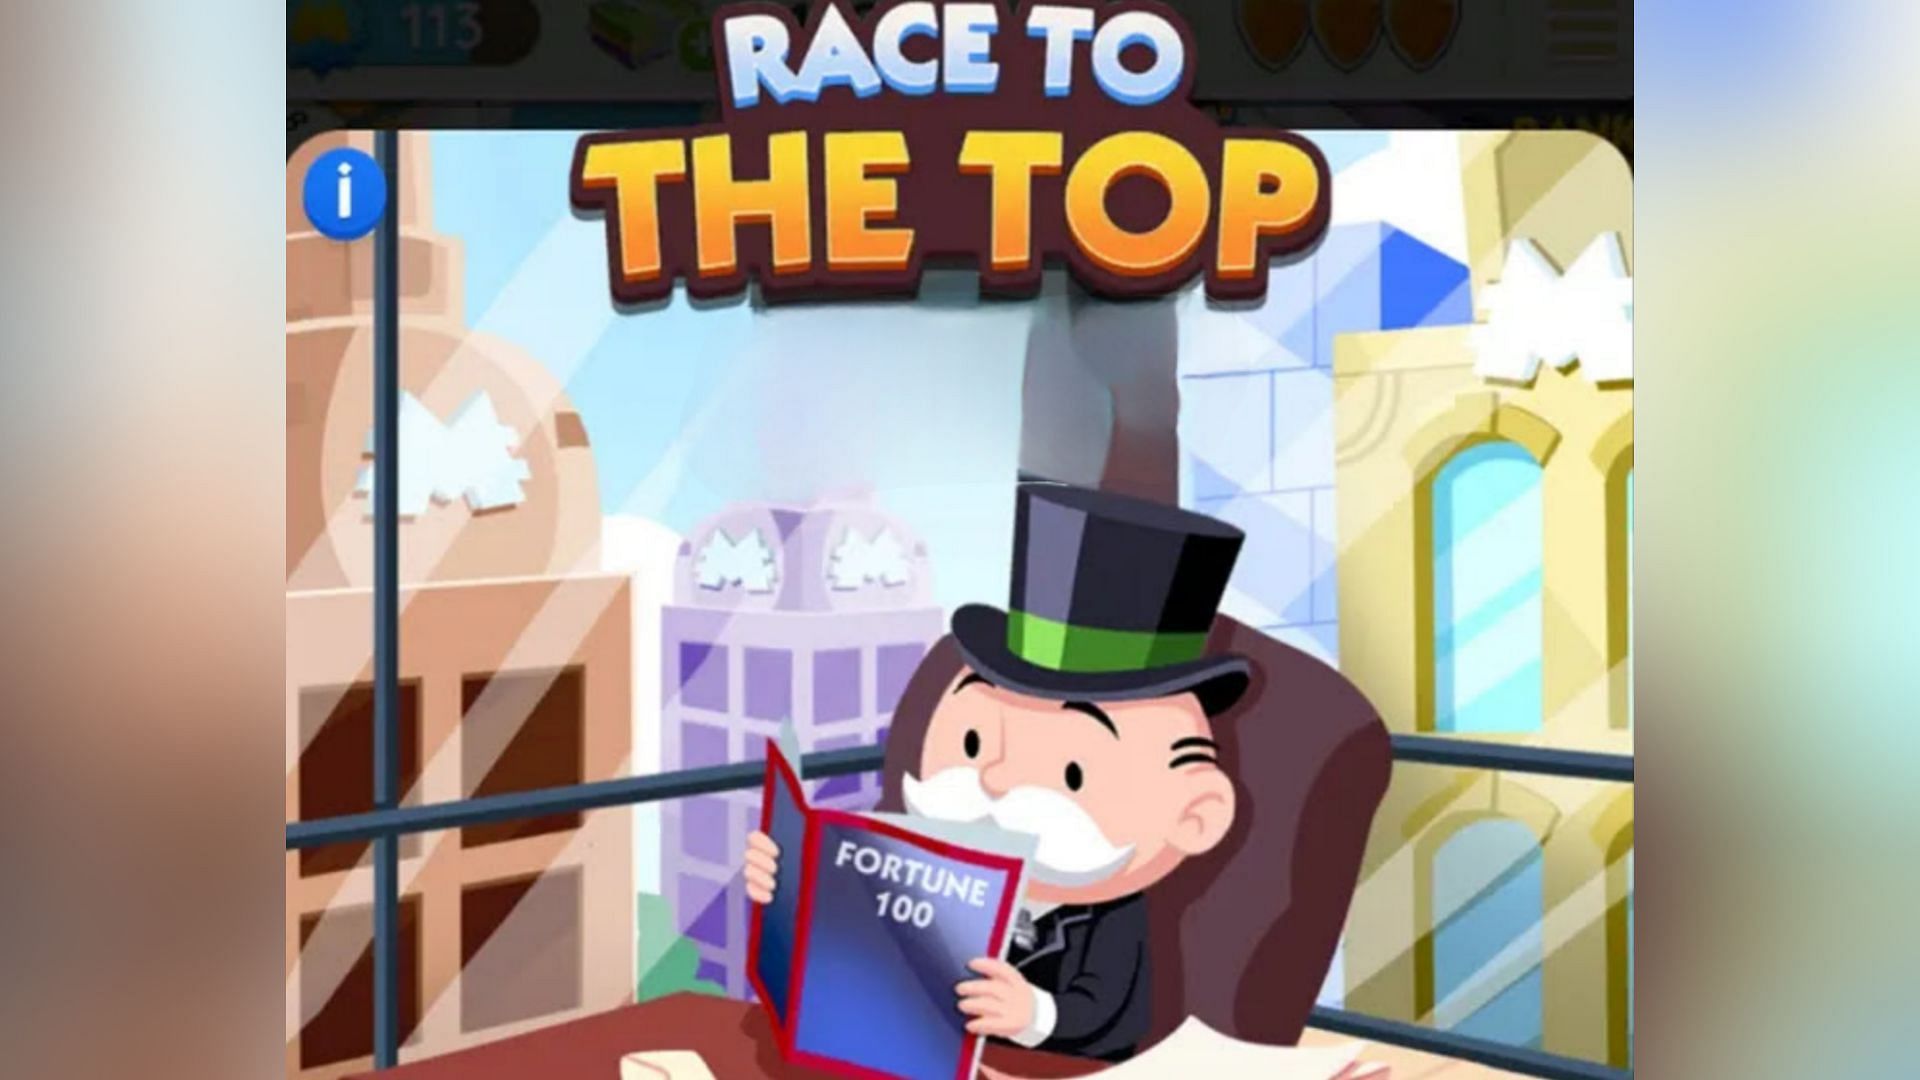 Monopoly Go Race to the Top event offers great milestone and leaderboard rewards (Image via Scopely) 